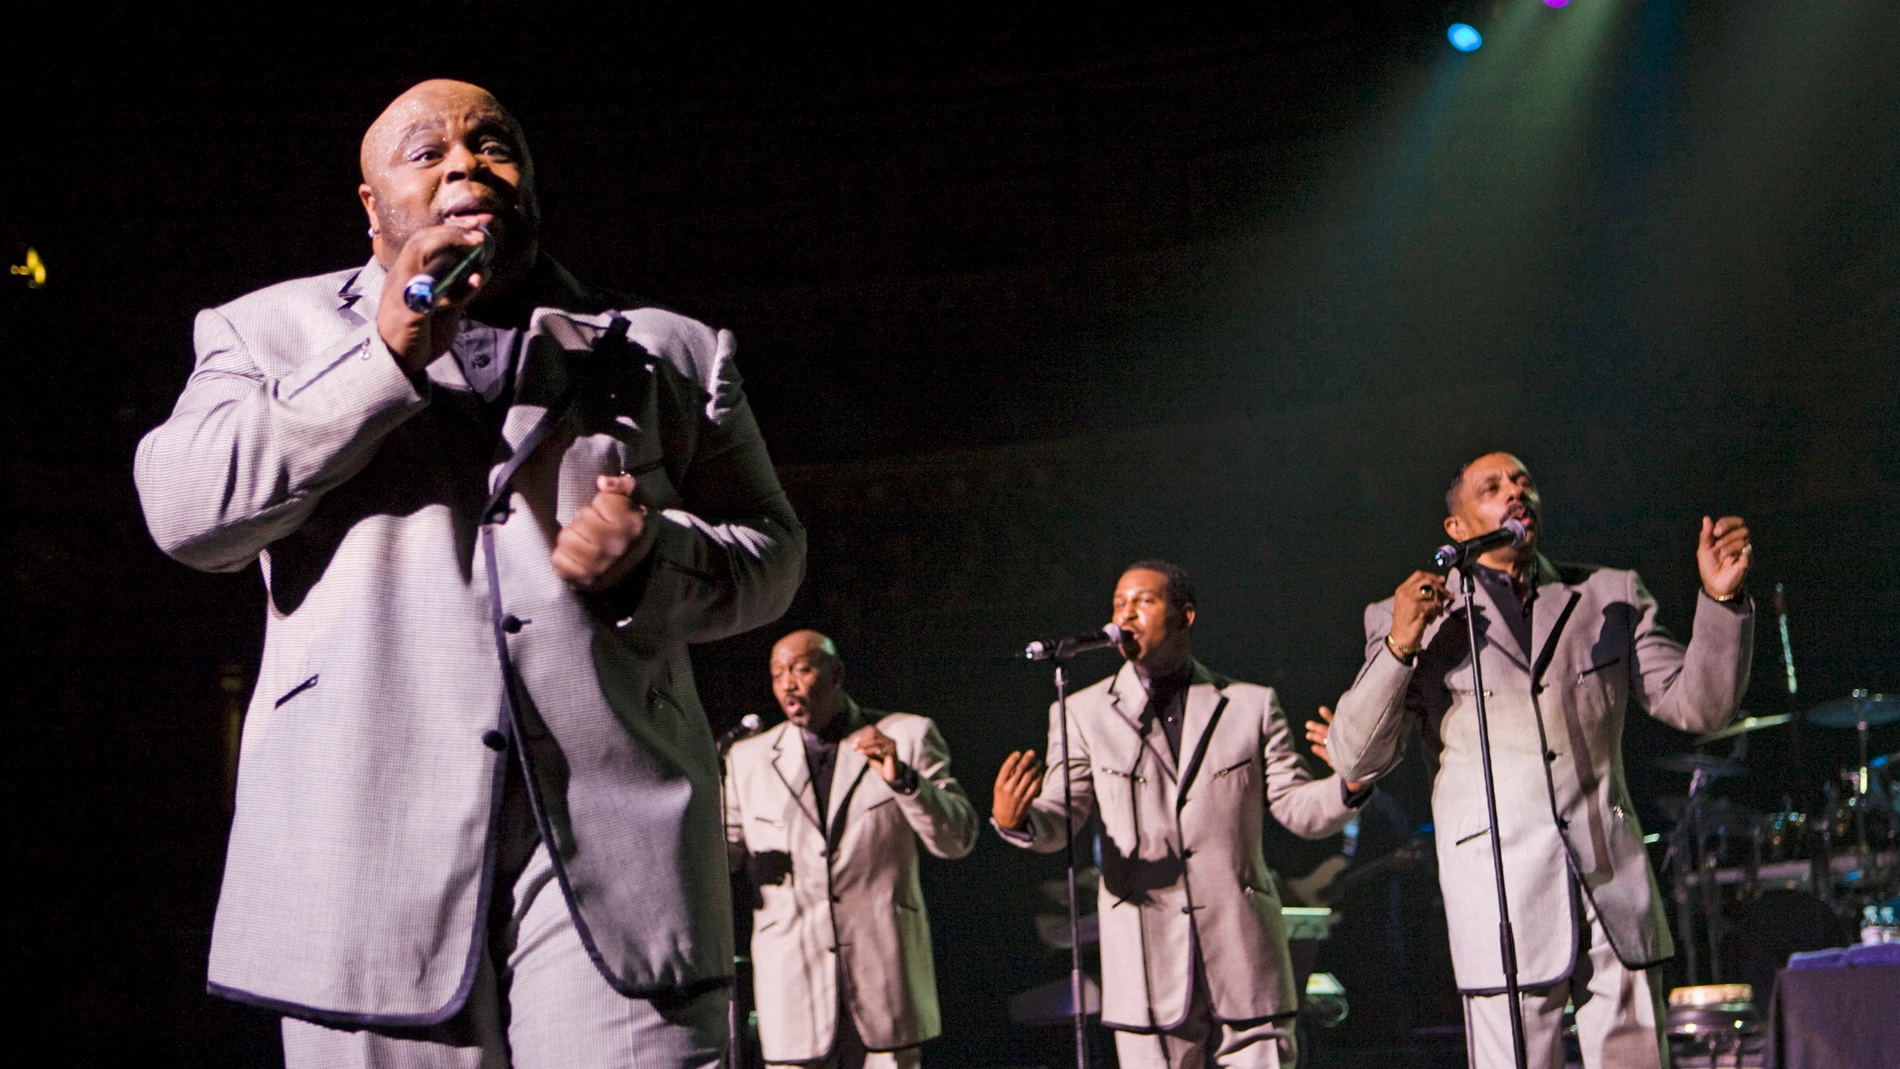 UNITED KINGDOM - NOVEMBER 19: ROYAL ALBERT HALL Photo of Terry WEEKS and TEMPTATIONS and Otis WILLIAMS and Bruce WILLIAMSON and Ron TYSON, L-R Bruce Williamson, Otis Williams, Terry Weeks, Ron Tyson performing on stage (Photo by Marc Broussely/Redferns)